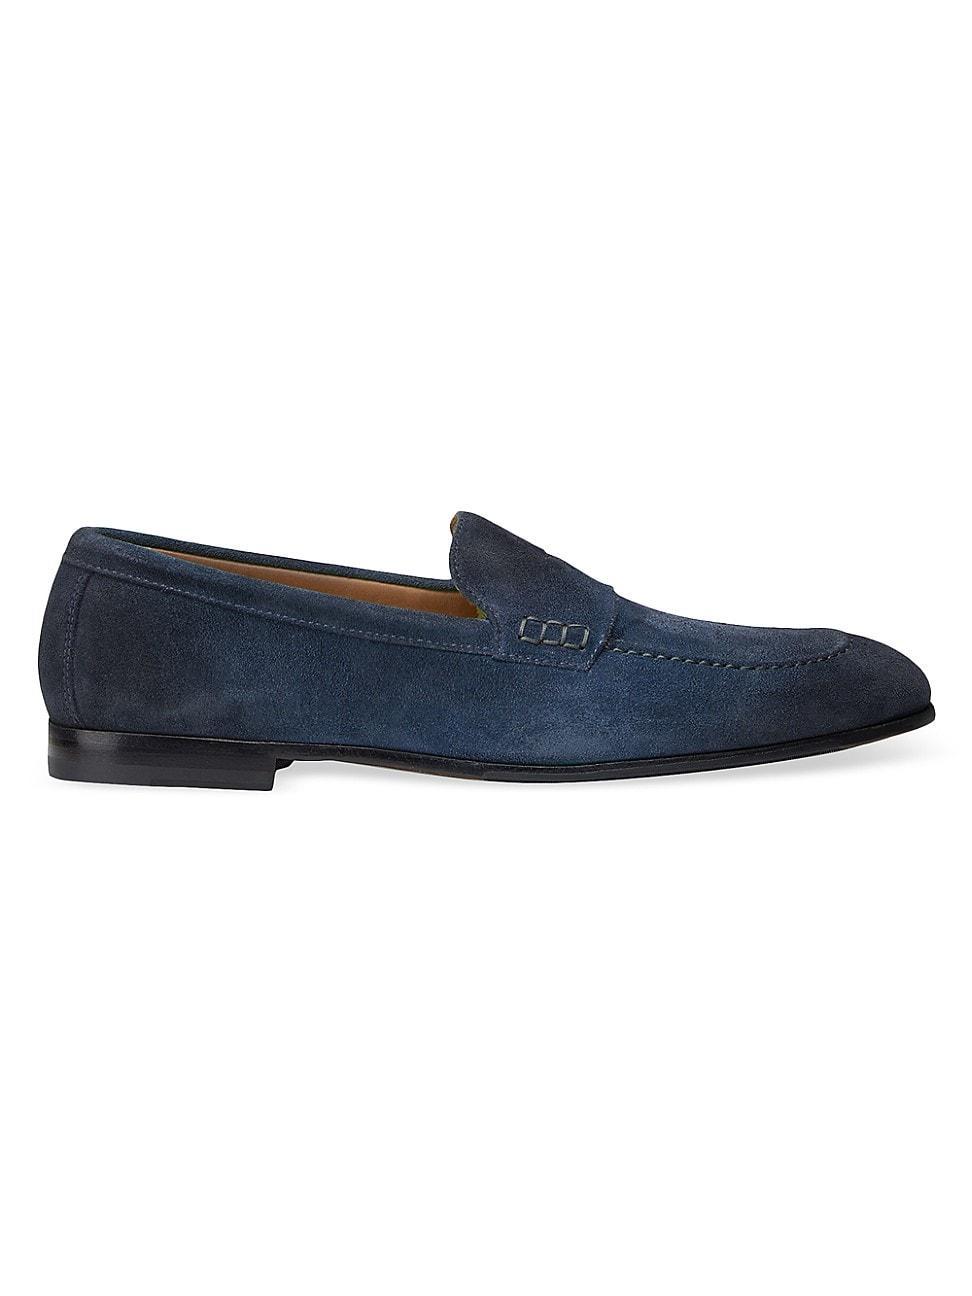 Mens Dandy Mocassino Adler Suede Penny Loafers Product Image